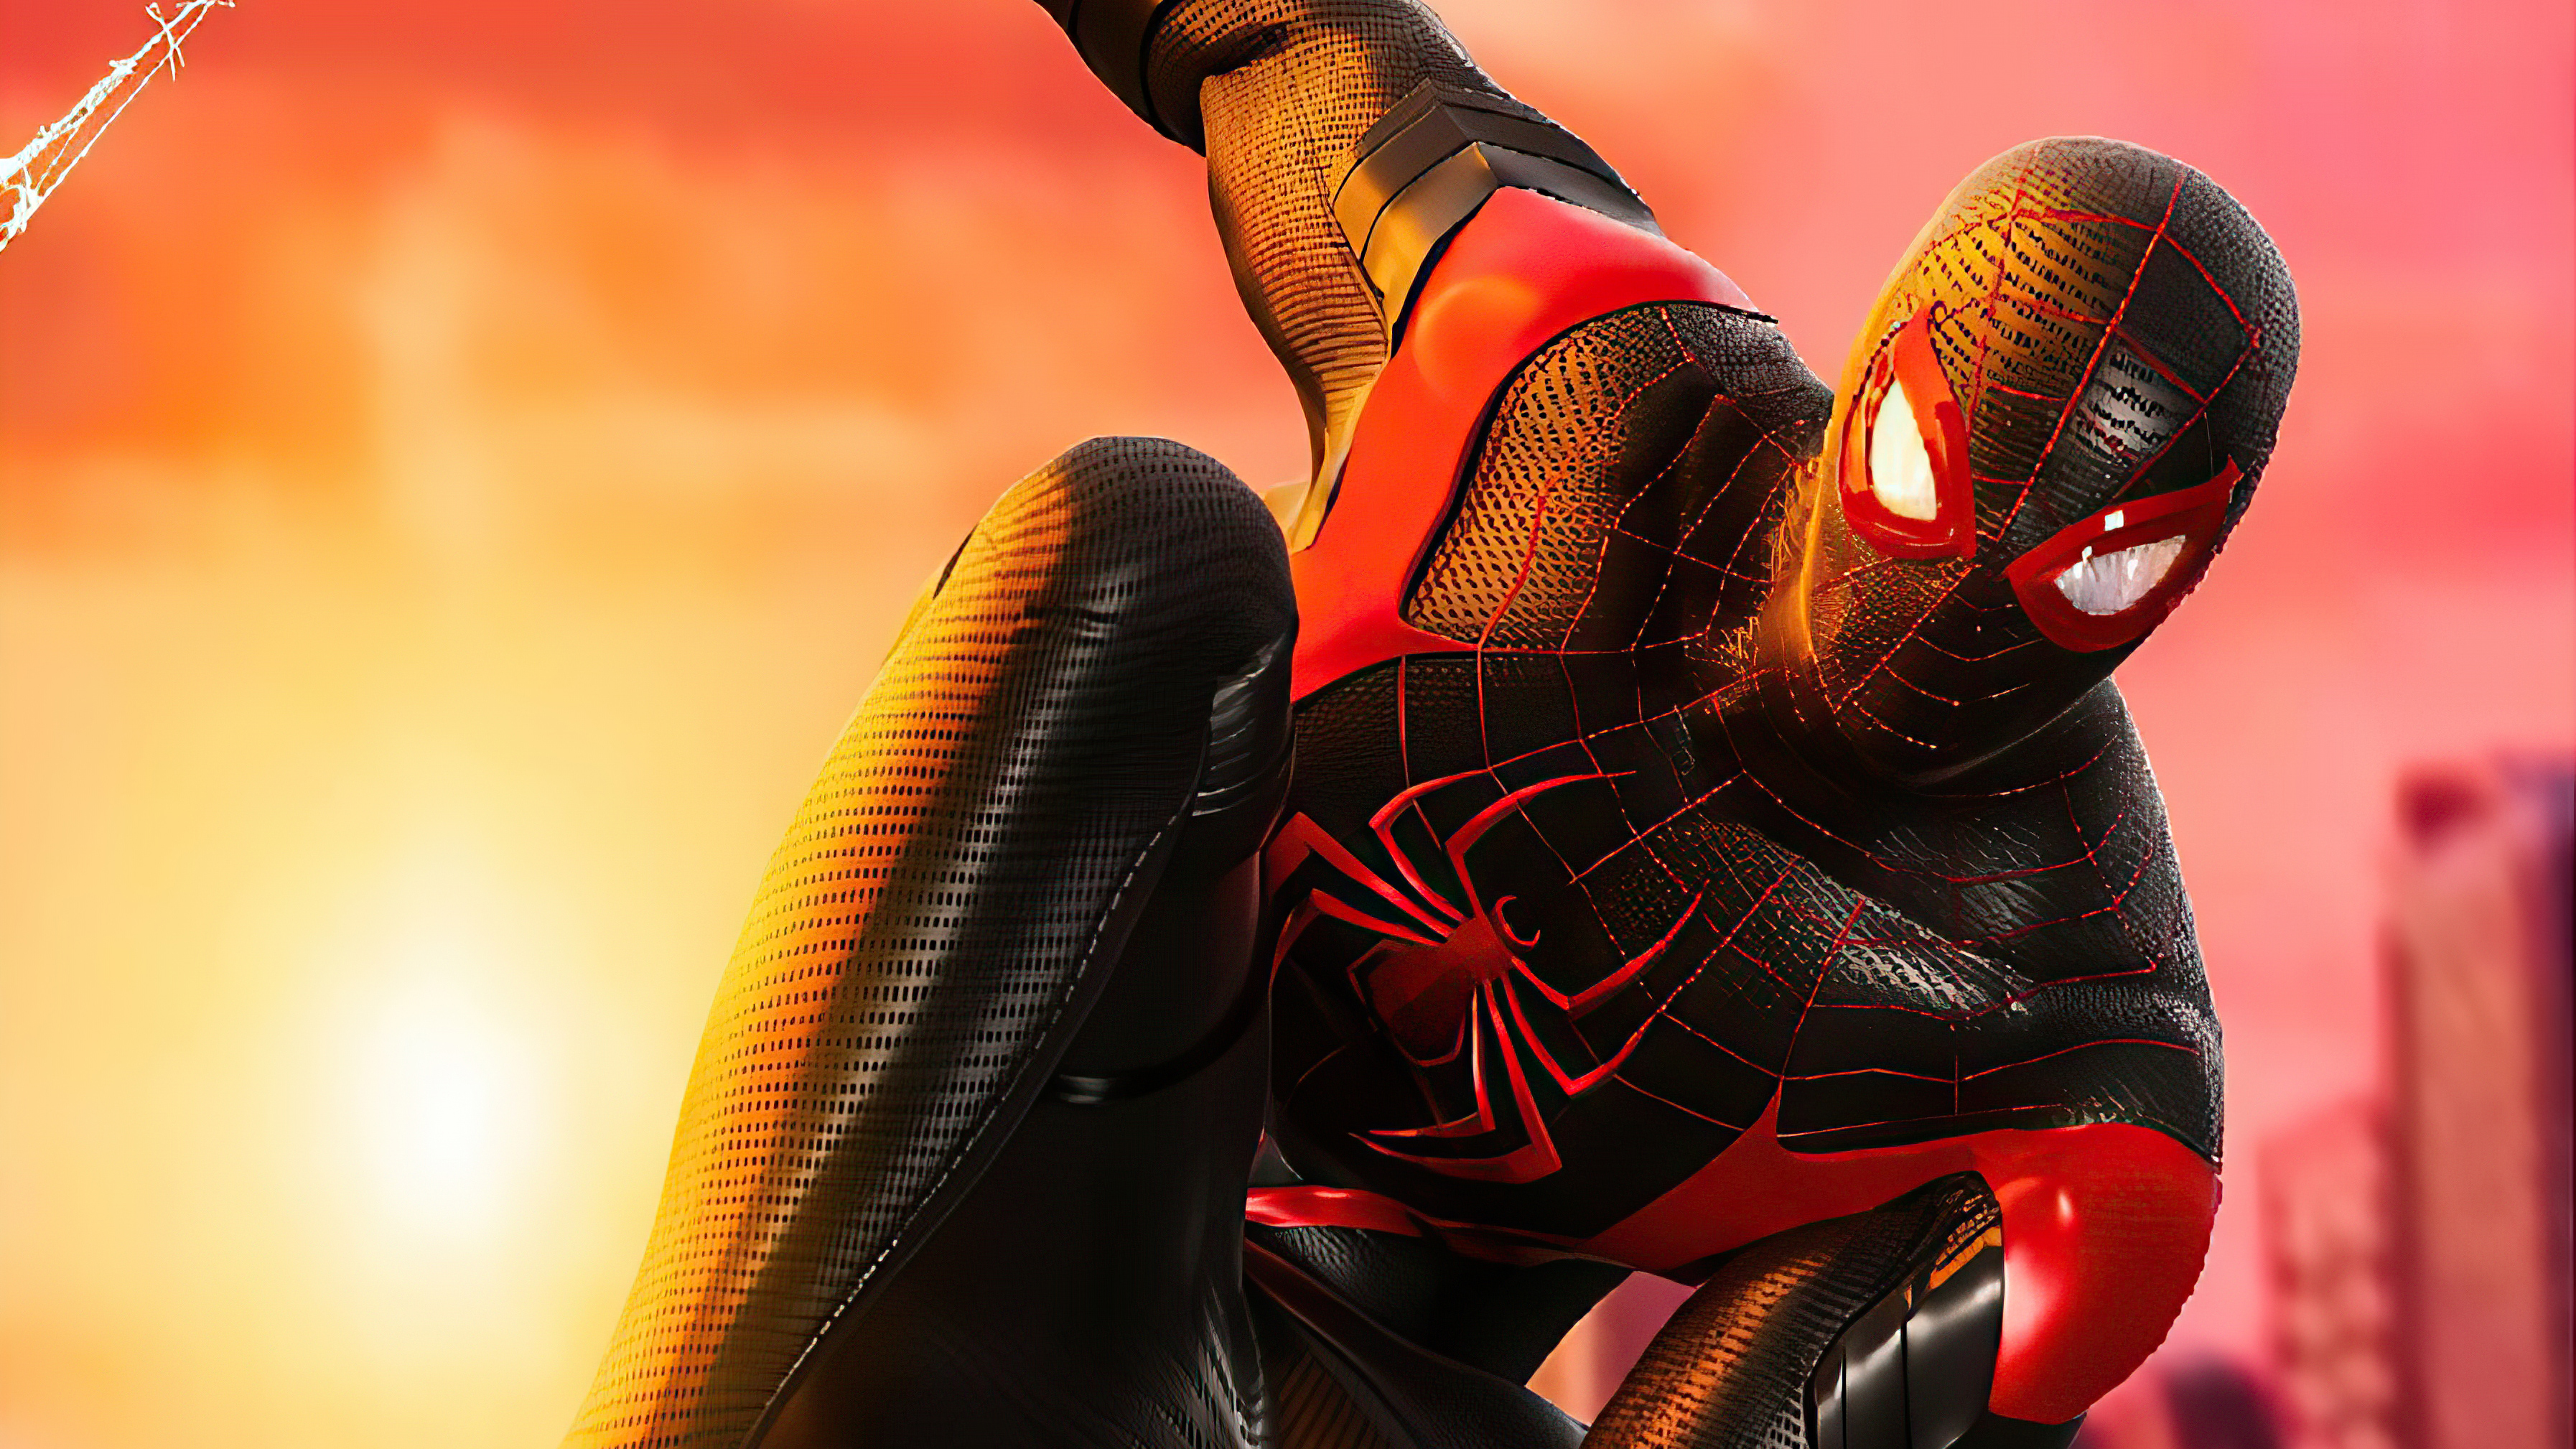 Spider Man Marvel 4k, HD Superheroes, 4k Wallpapers, Images, Backgrounds,  Photos and Pictures